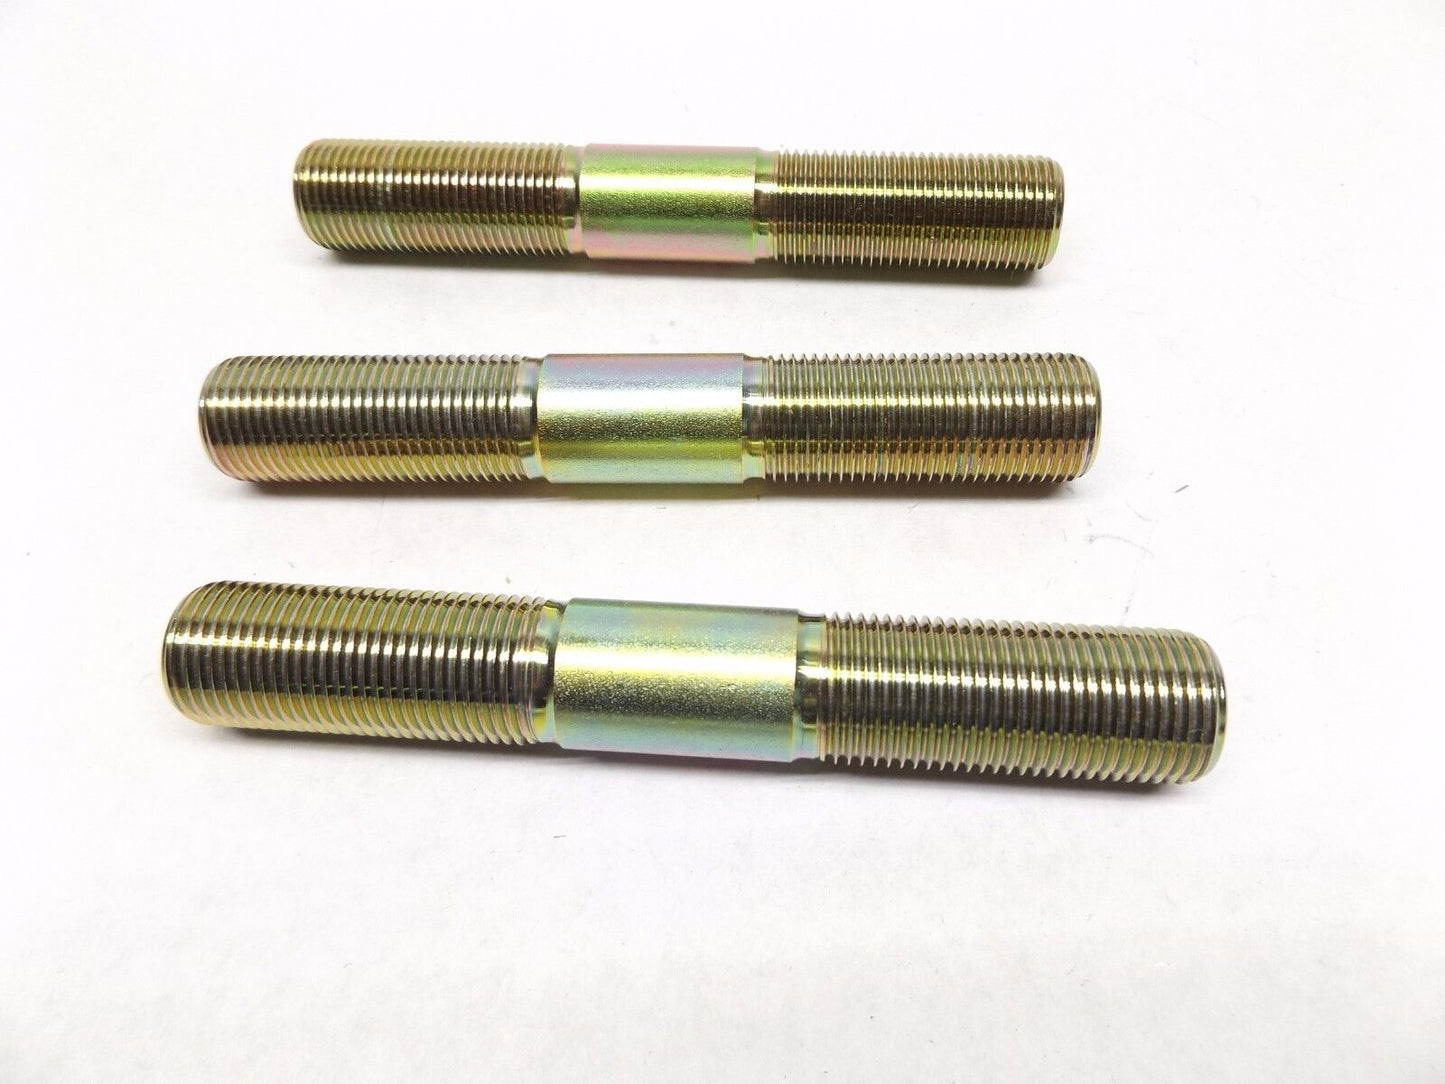 LOT OF 3 DOUBLE END STUD B7 3/4-16 X 5" YELLOW, 1-3/4" THREAD PER SIDE